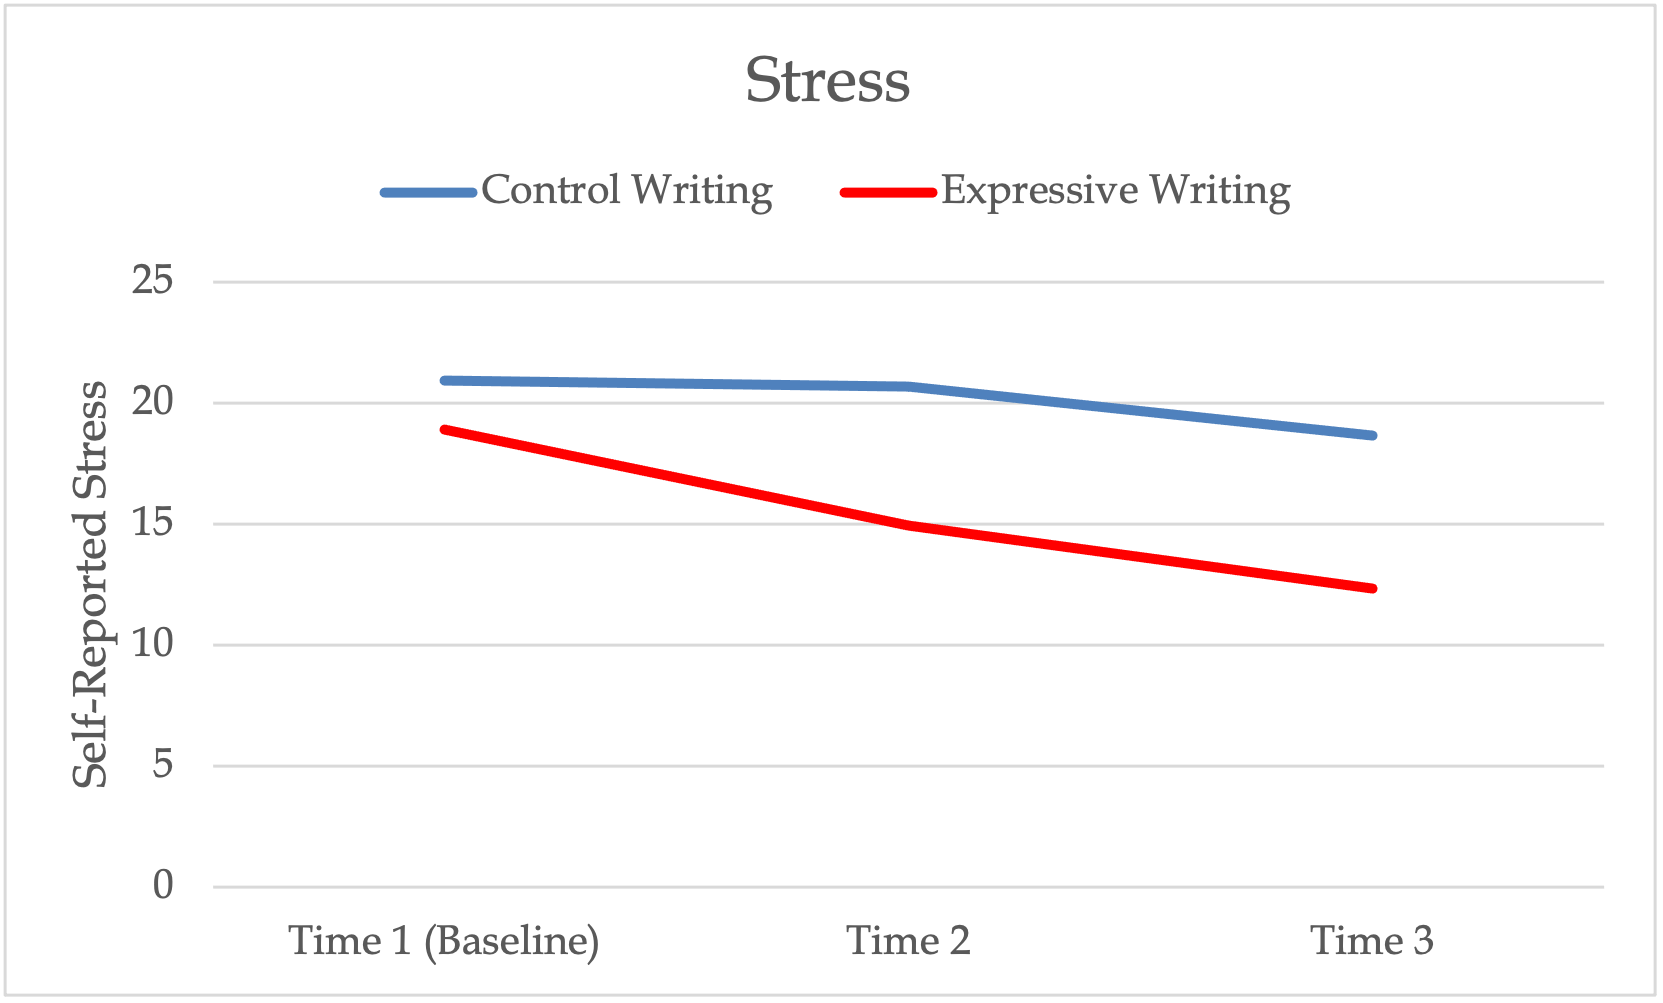 A line graph showing Stress levels during control writing, and expressive writing.